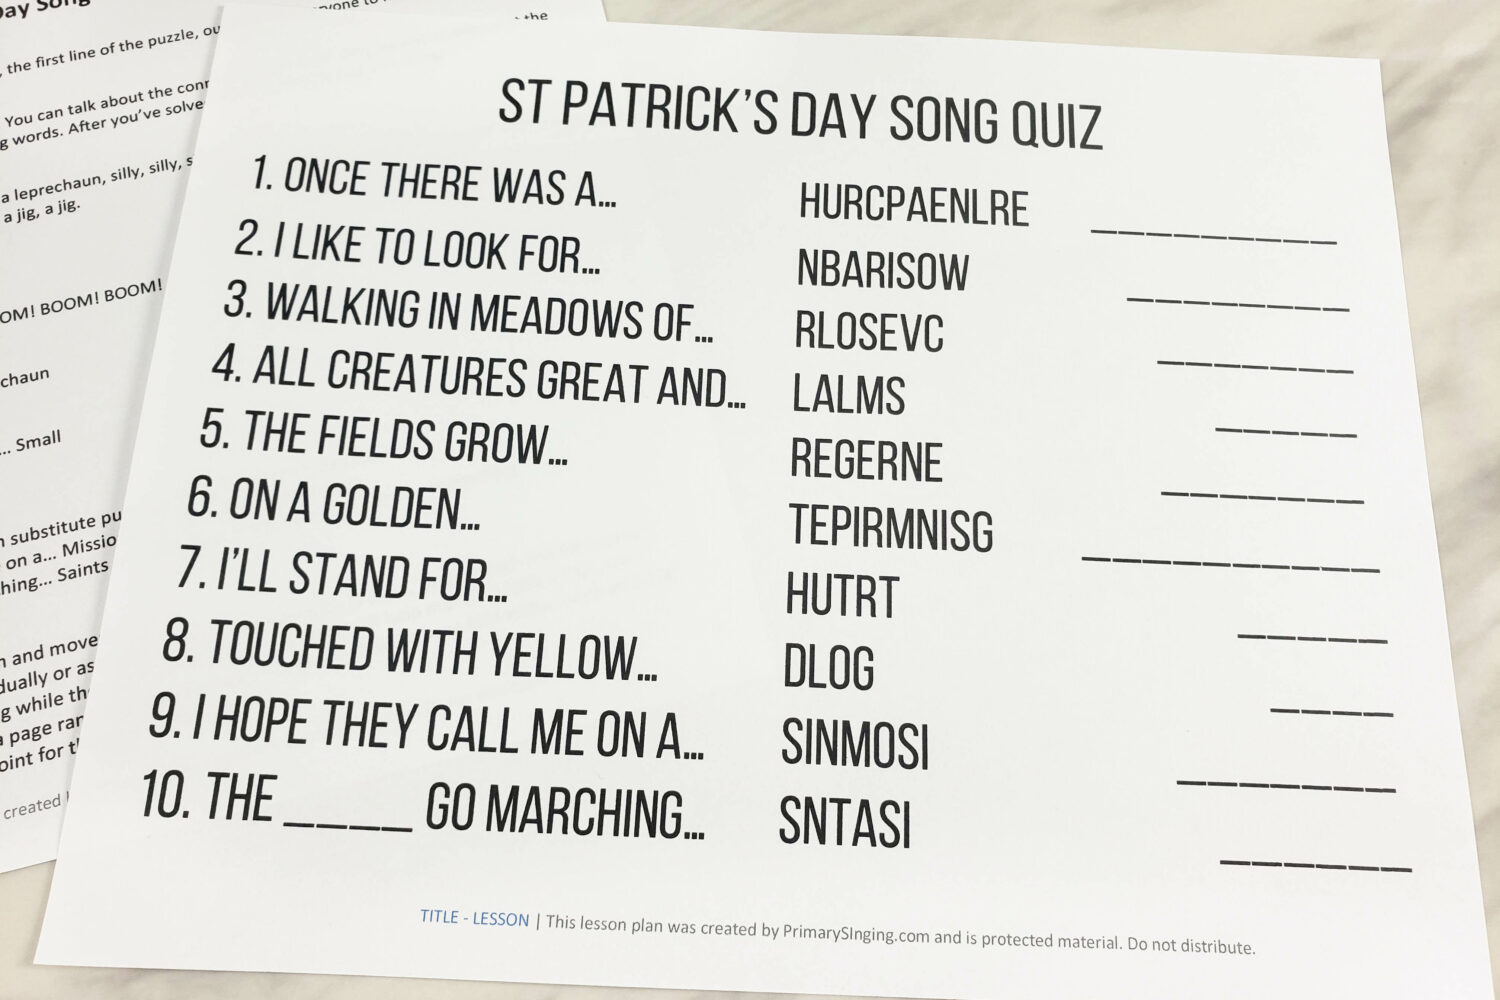 St Patrick's Day What Comes Next Game Easy singing time ideas for Primary Music Leaders St Patricks Day Song Quiz 20220225 081046